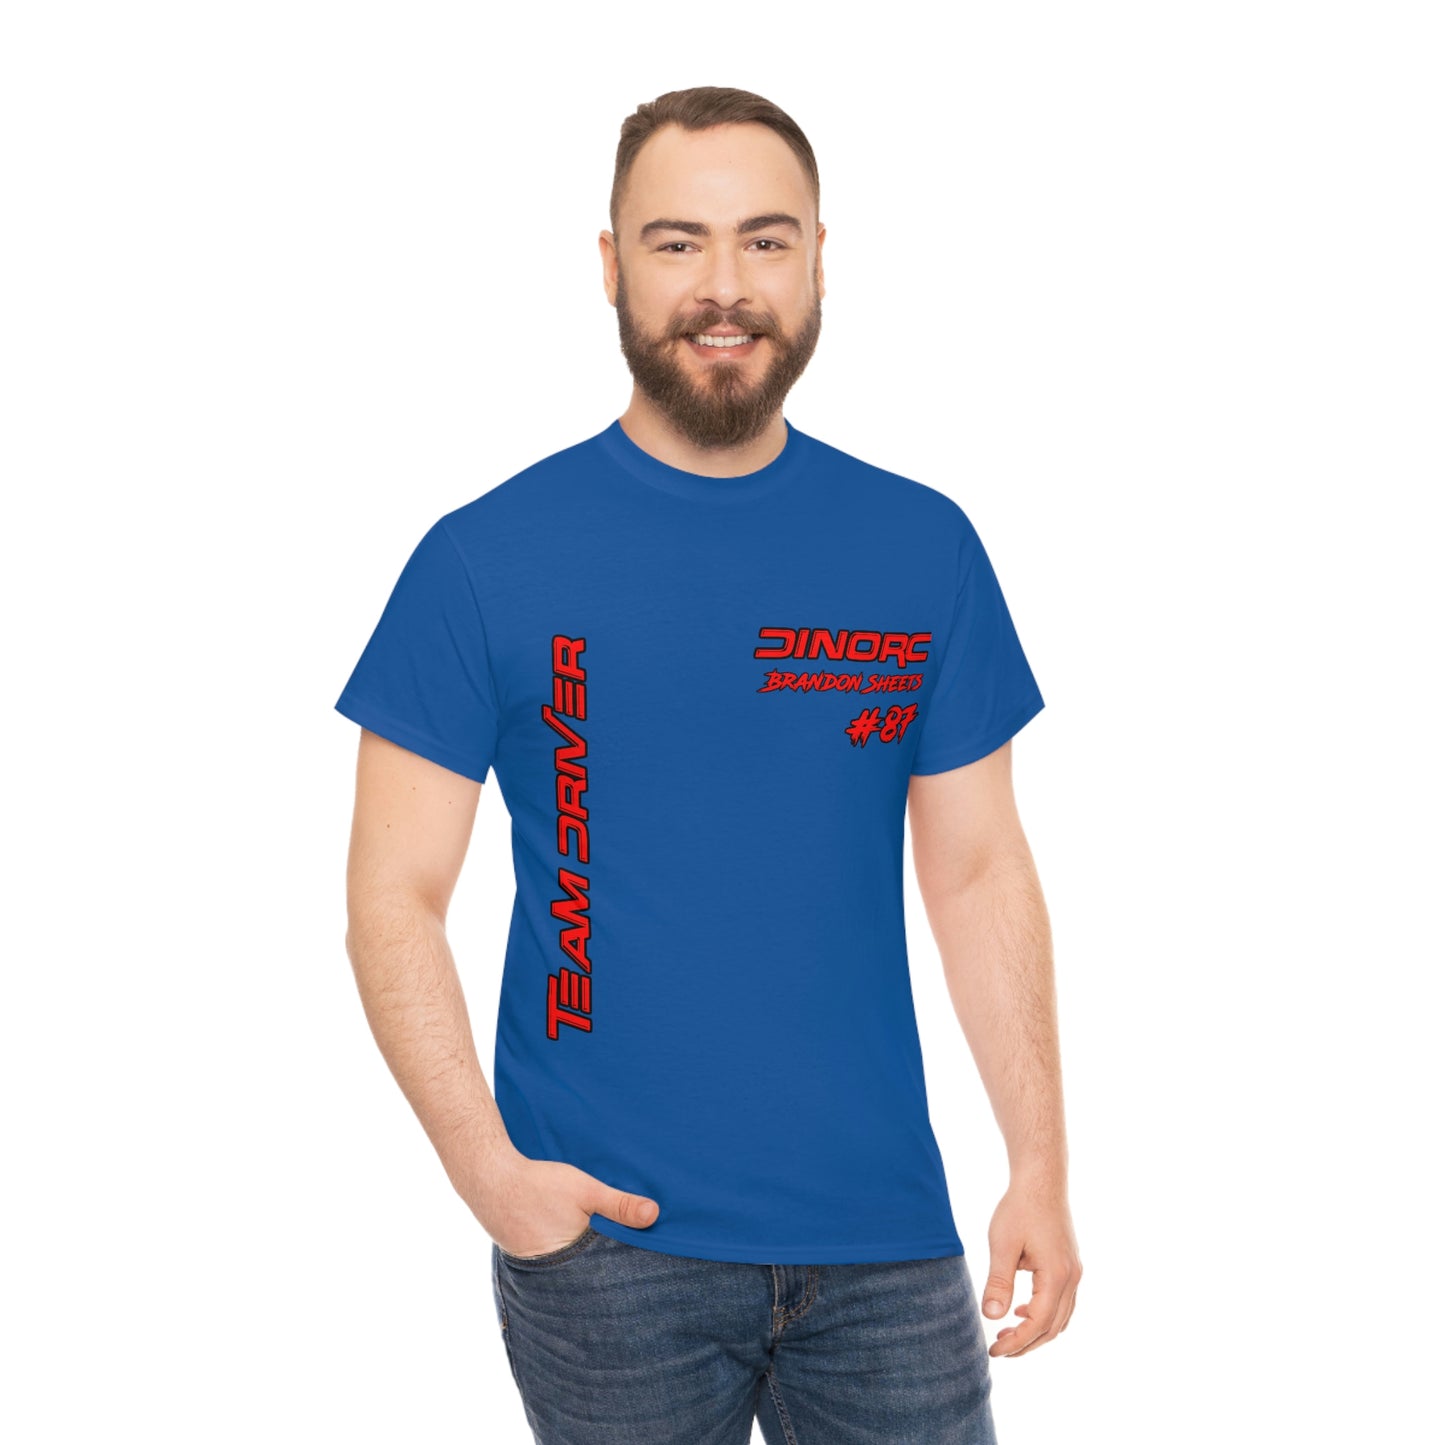 Vertical Team Driver Brandon Sheets Front and Back DinoRc Logo T-Shirt S-5x 5 colors